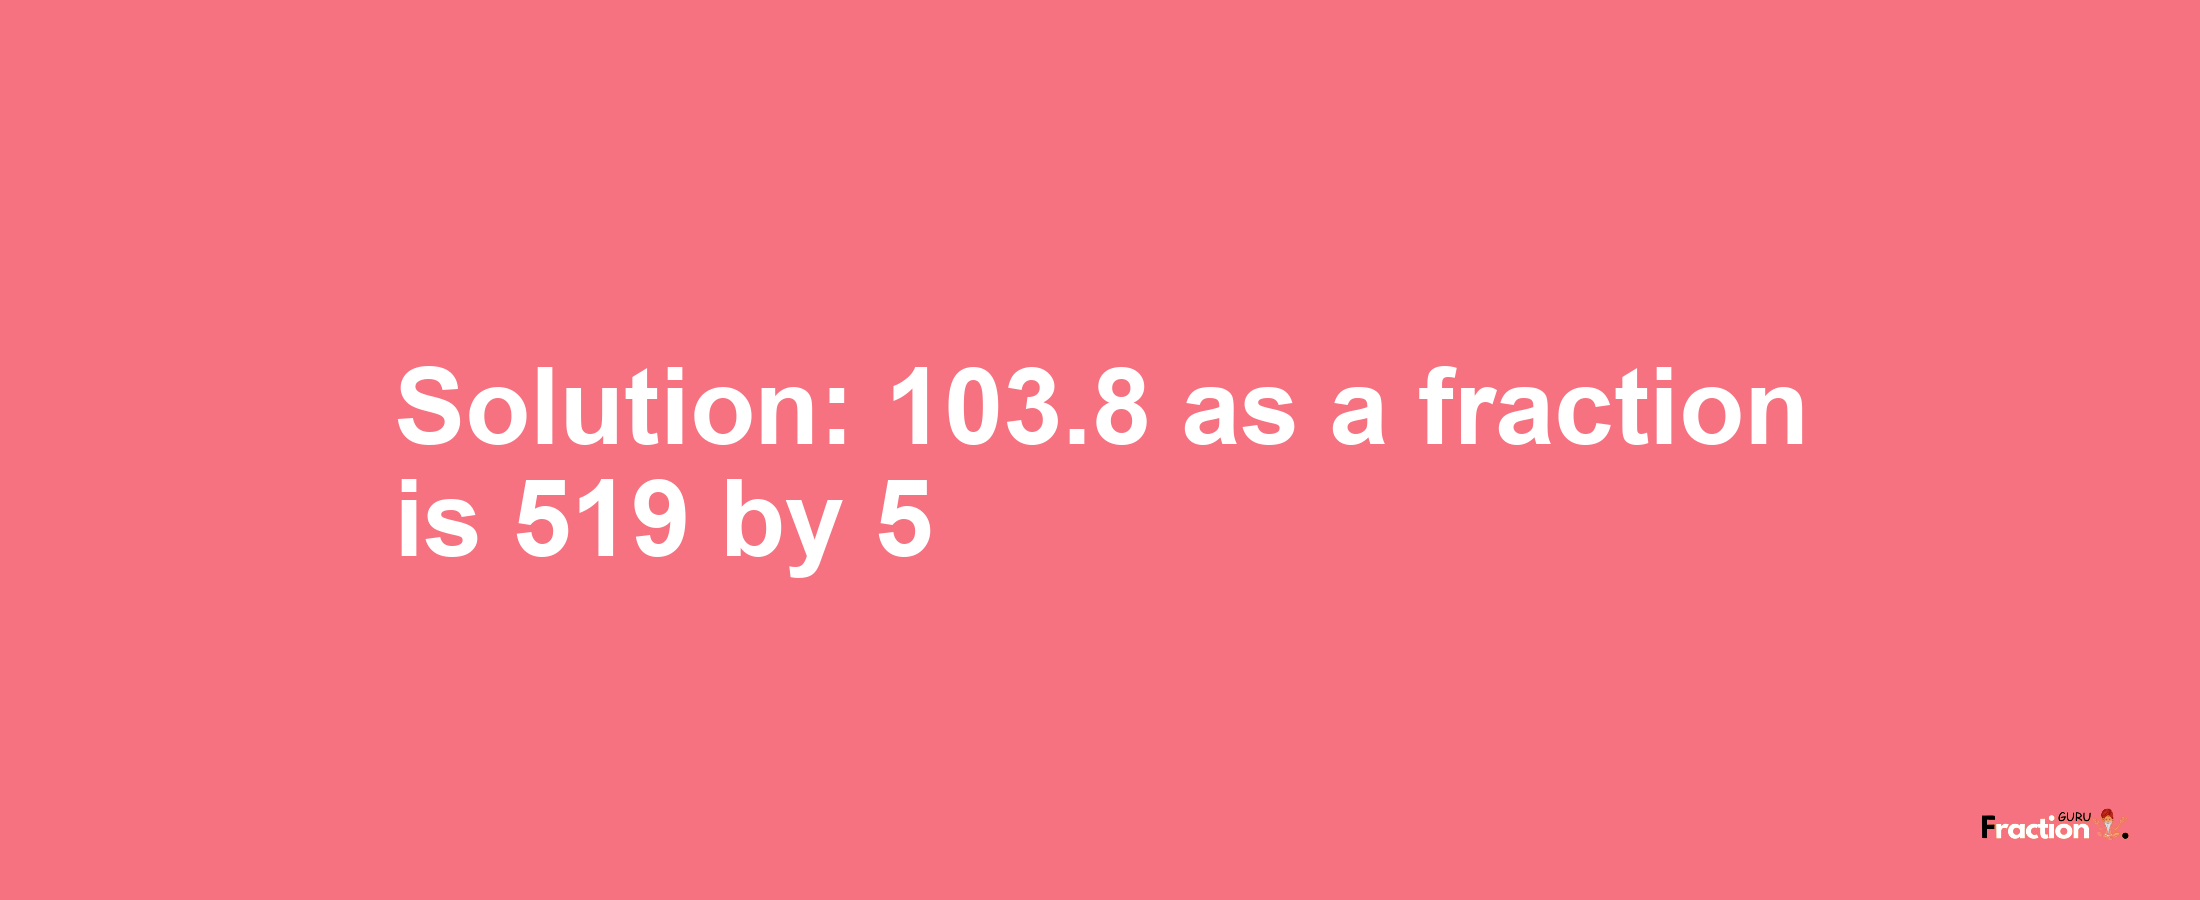 Solution:103.8 as a fraction is 519/5